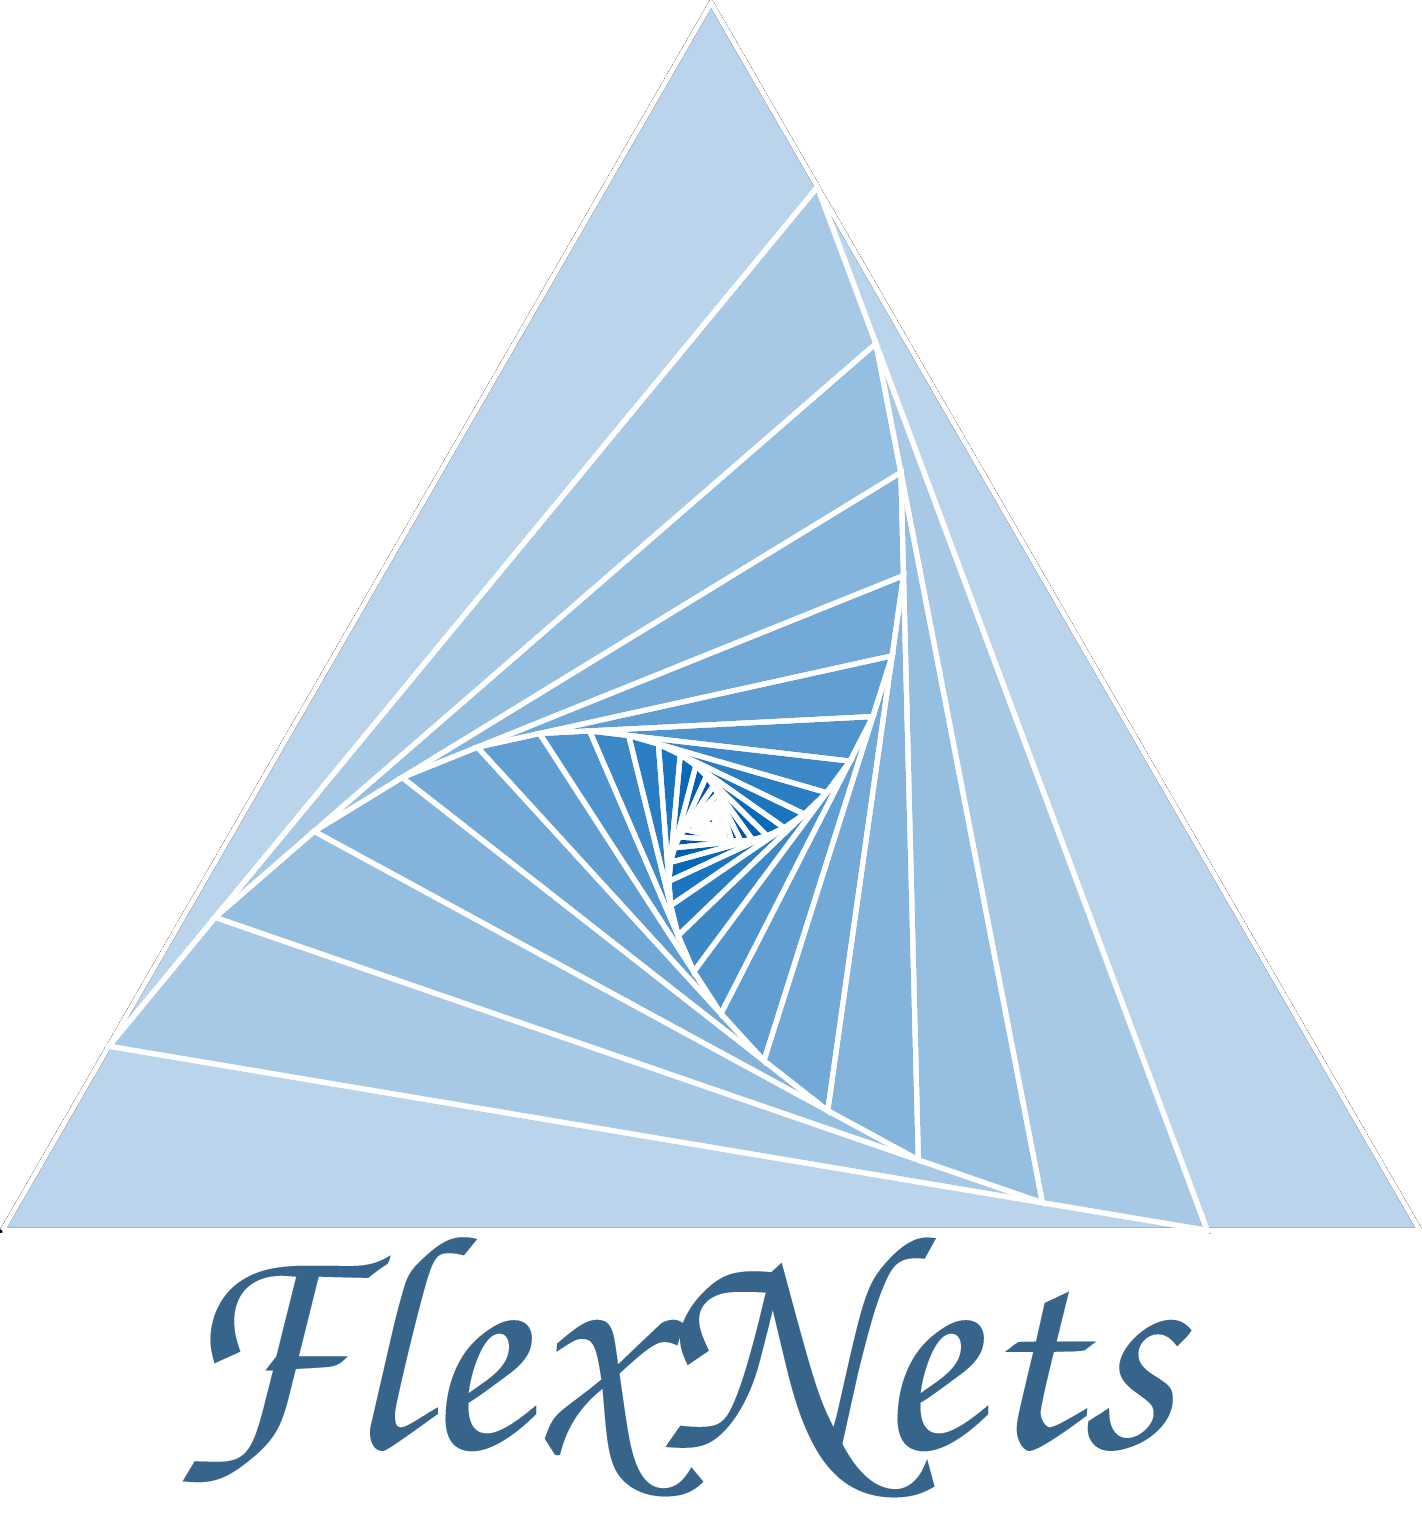 Workshop on Flexible and Agile Networks (FlexNets)